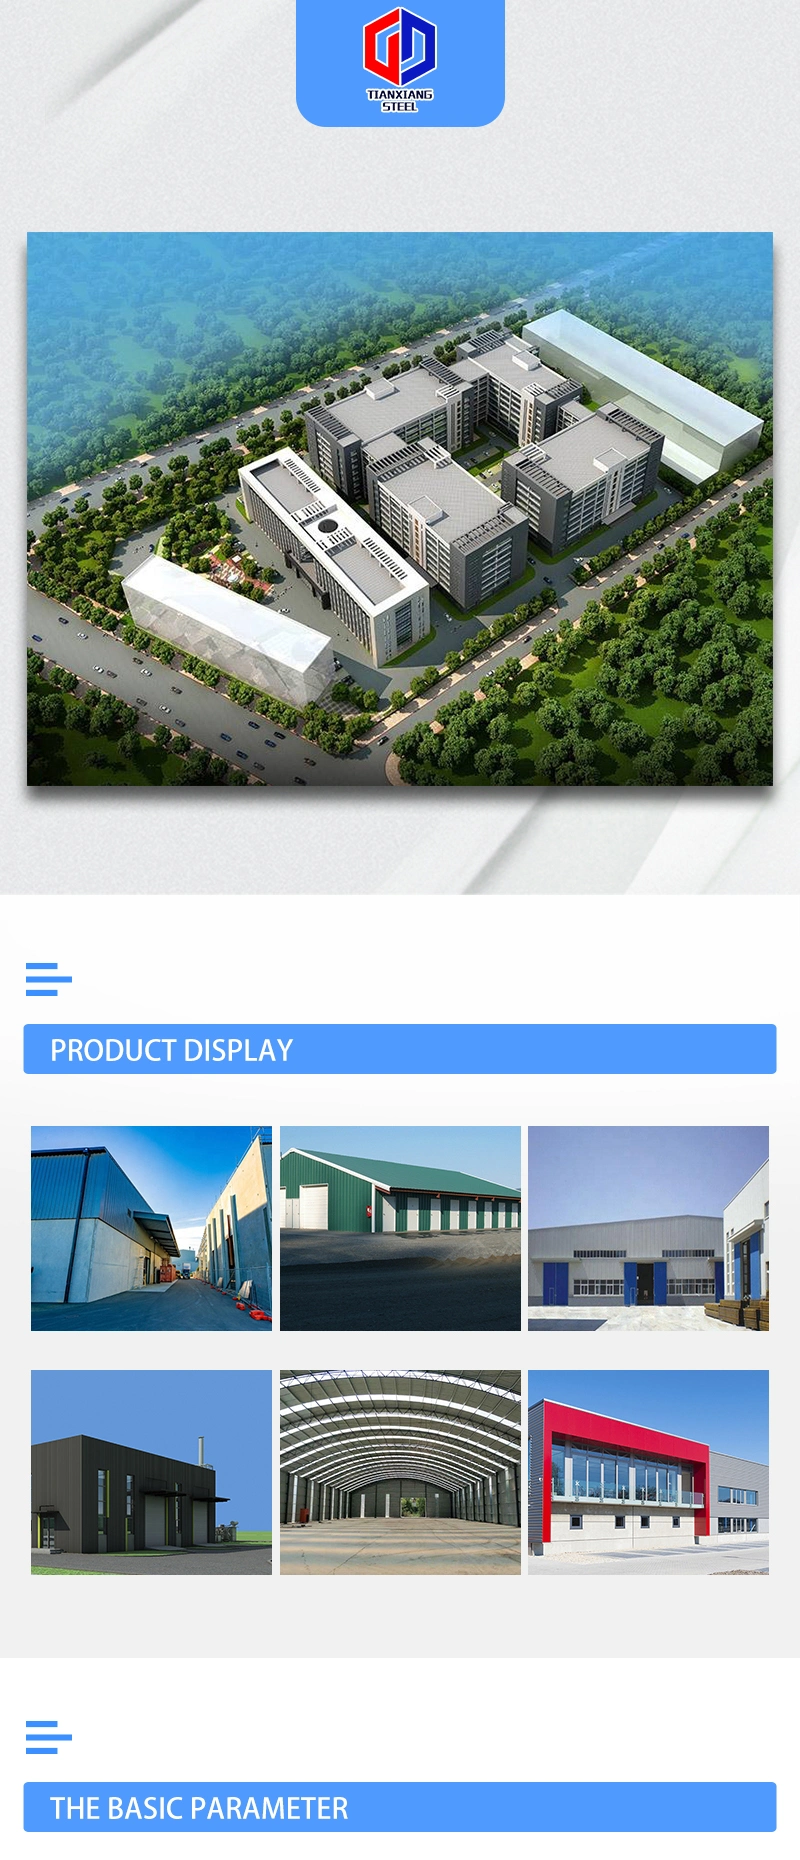 Large Span Steel Space Frame Structure Warehouse Prefabricated Warehouse Steel Structure Assembly Warehouse